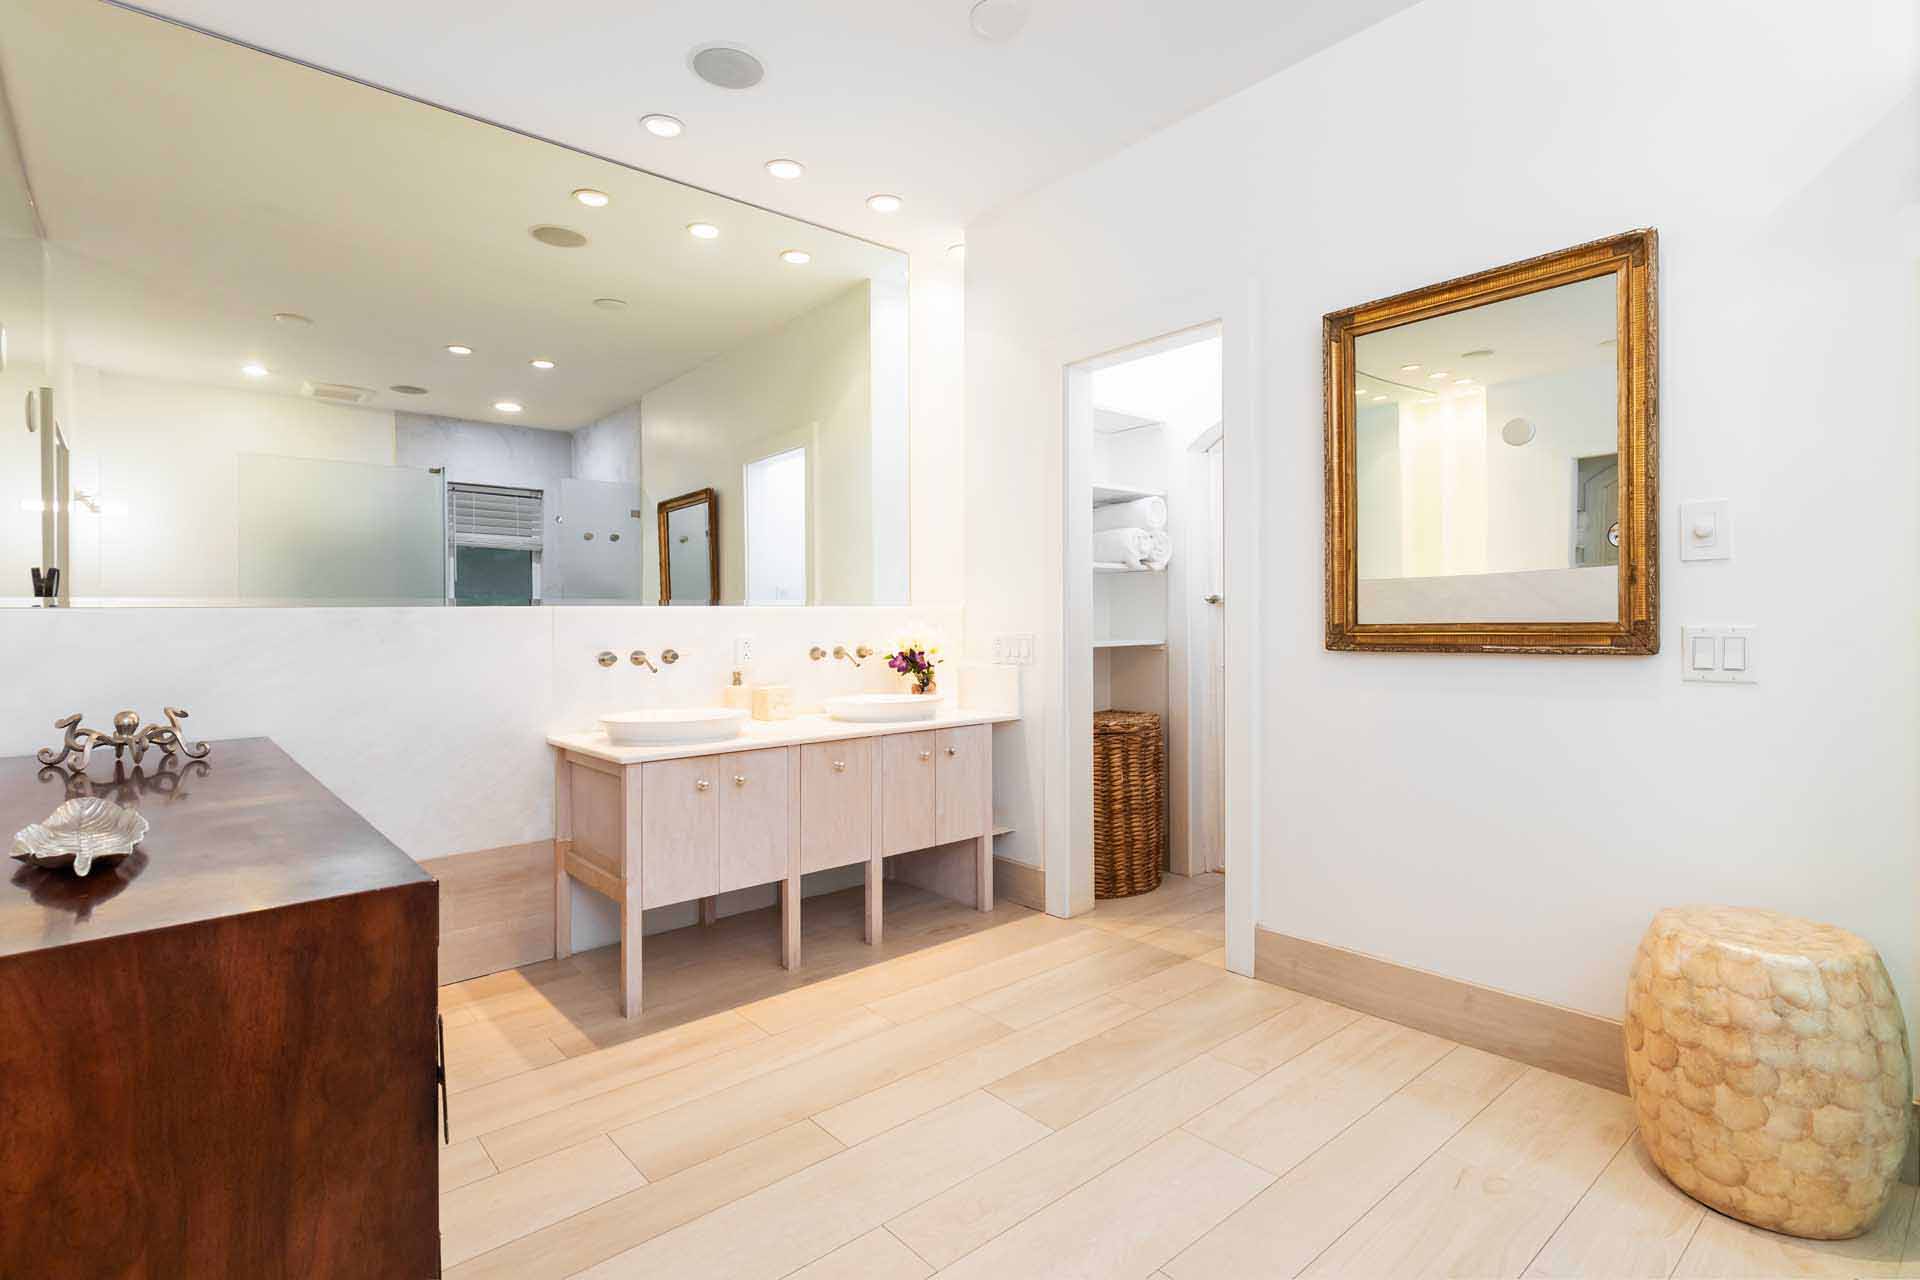 Grand Lodge bathroom with double vanity, linen closet and large mirrors